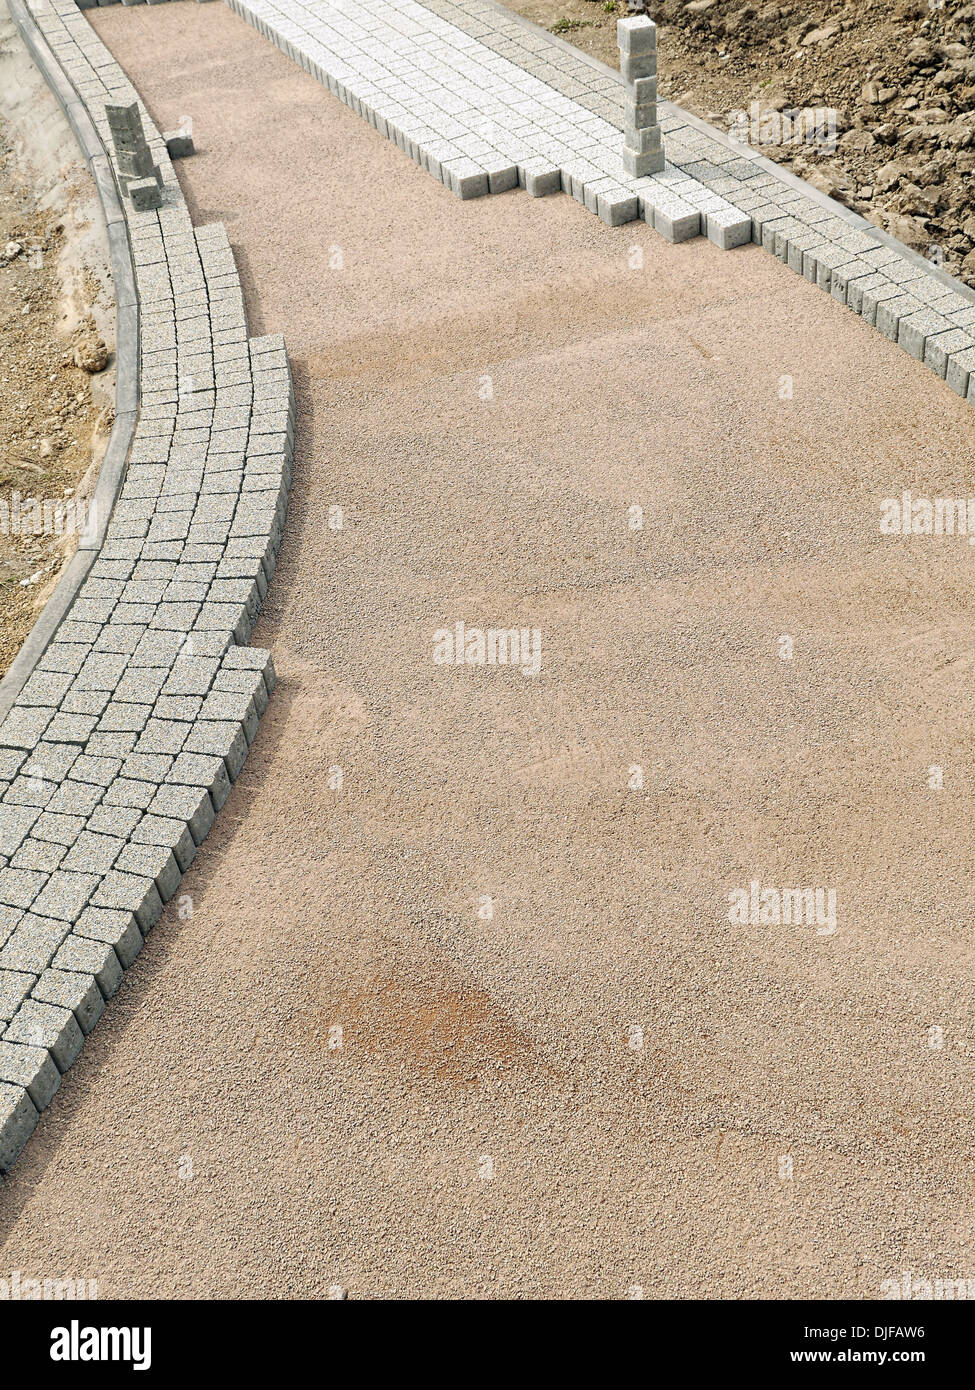 Unfinished pavement path being laid from concrete pavement blocks with mineral topping Stock Photo